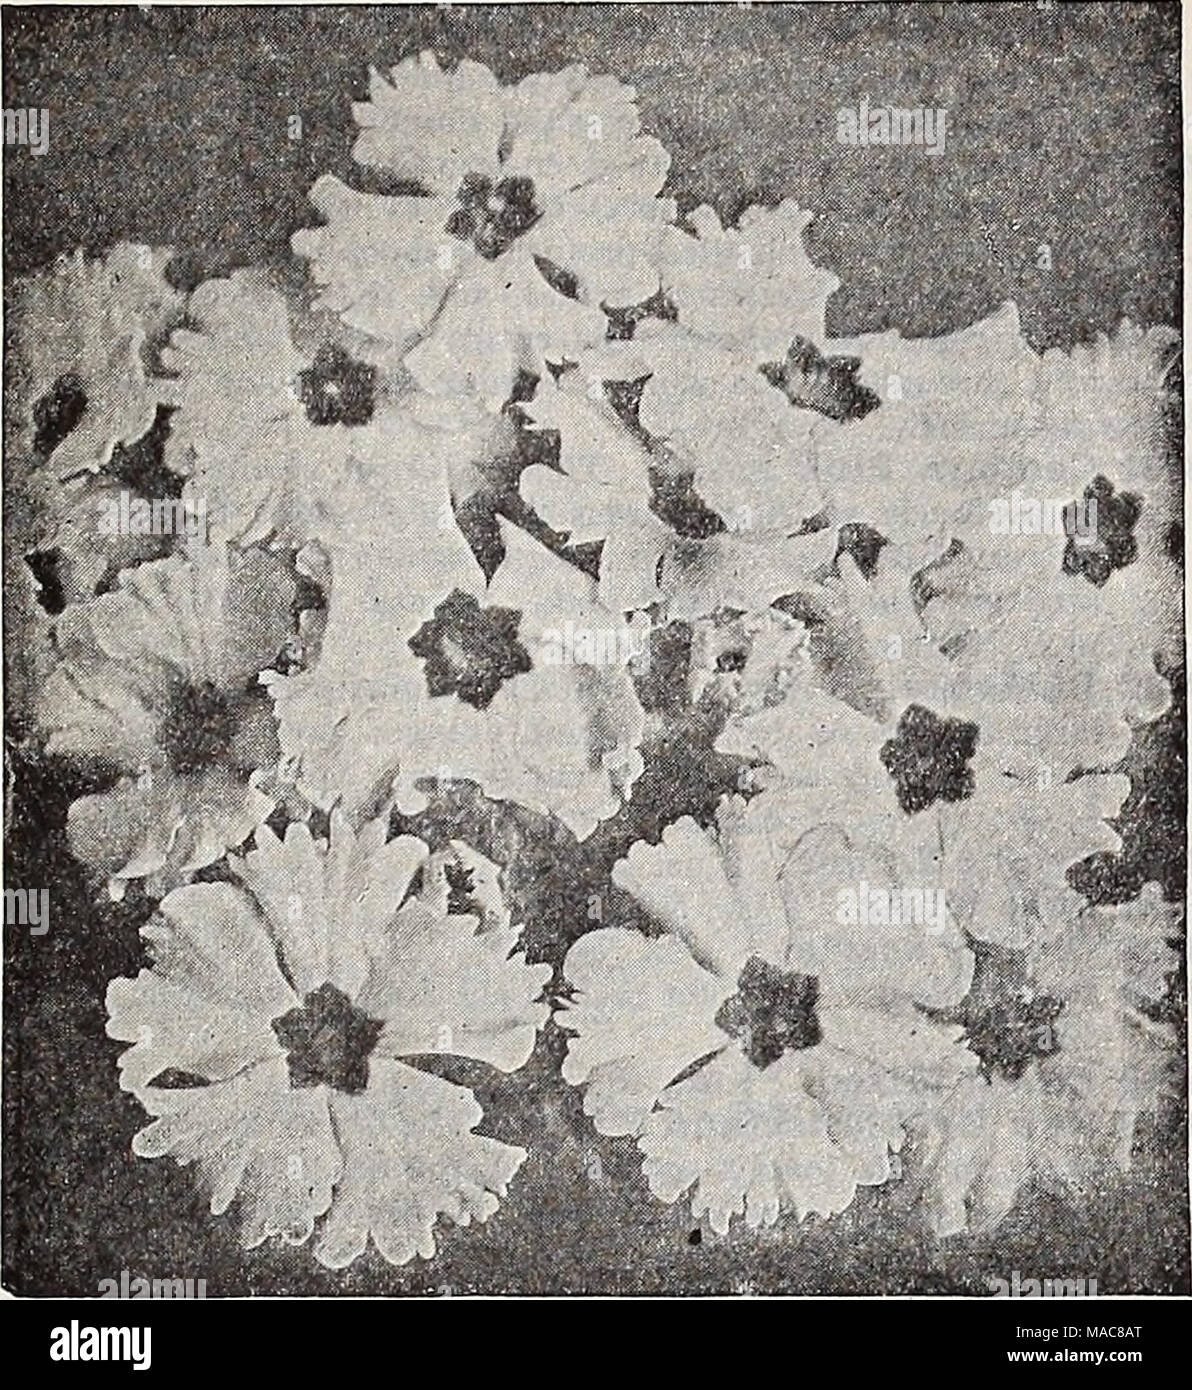 . Dreer's midsummer list 1932 . : Dreer's &quot;Peerless&quot; Chinese Primroses Primula (Primrose) The charming and beautiful Chinese Fringed Primrose and Obconica varieties are indispensable for winter or spring decora- tions in the home or conservatory. They are one of the most im- portant winter blooming pot plants. Dreer's &quot;Peerless&quot; Chinese Primroses PER pkt. 3784 Peerless Blue (True Blue) $0 50 35 35 35 35 3785 -White (Brook's White). Pure white 3787 -Pink (Delicata). Soft pink 3783 —Scarlet {Chiswick Red Imp.). Rich scarlet 3786 —Crimson (Crimson King). Rich luminous crimson. Stock Photo